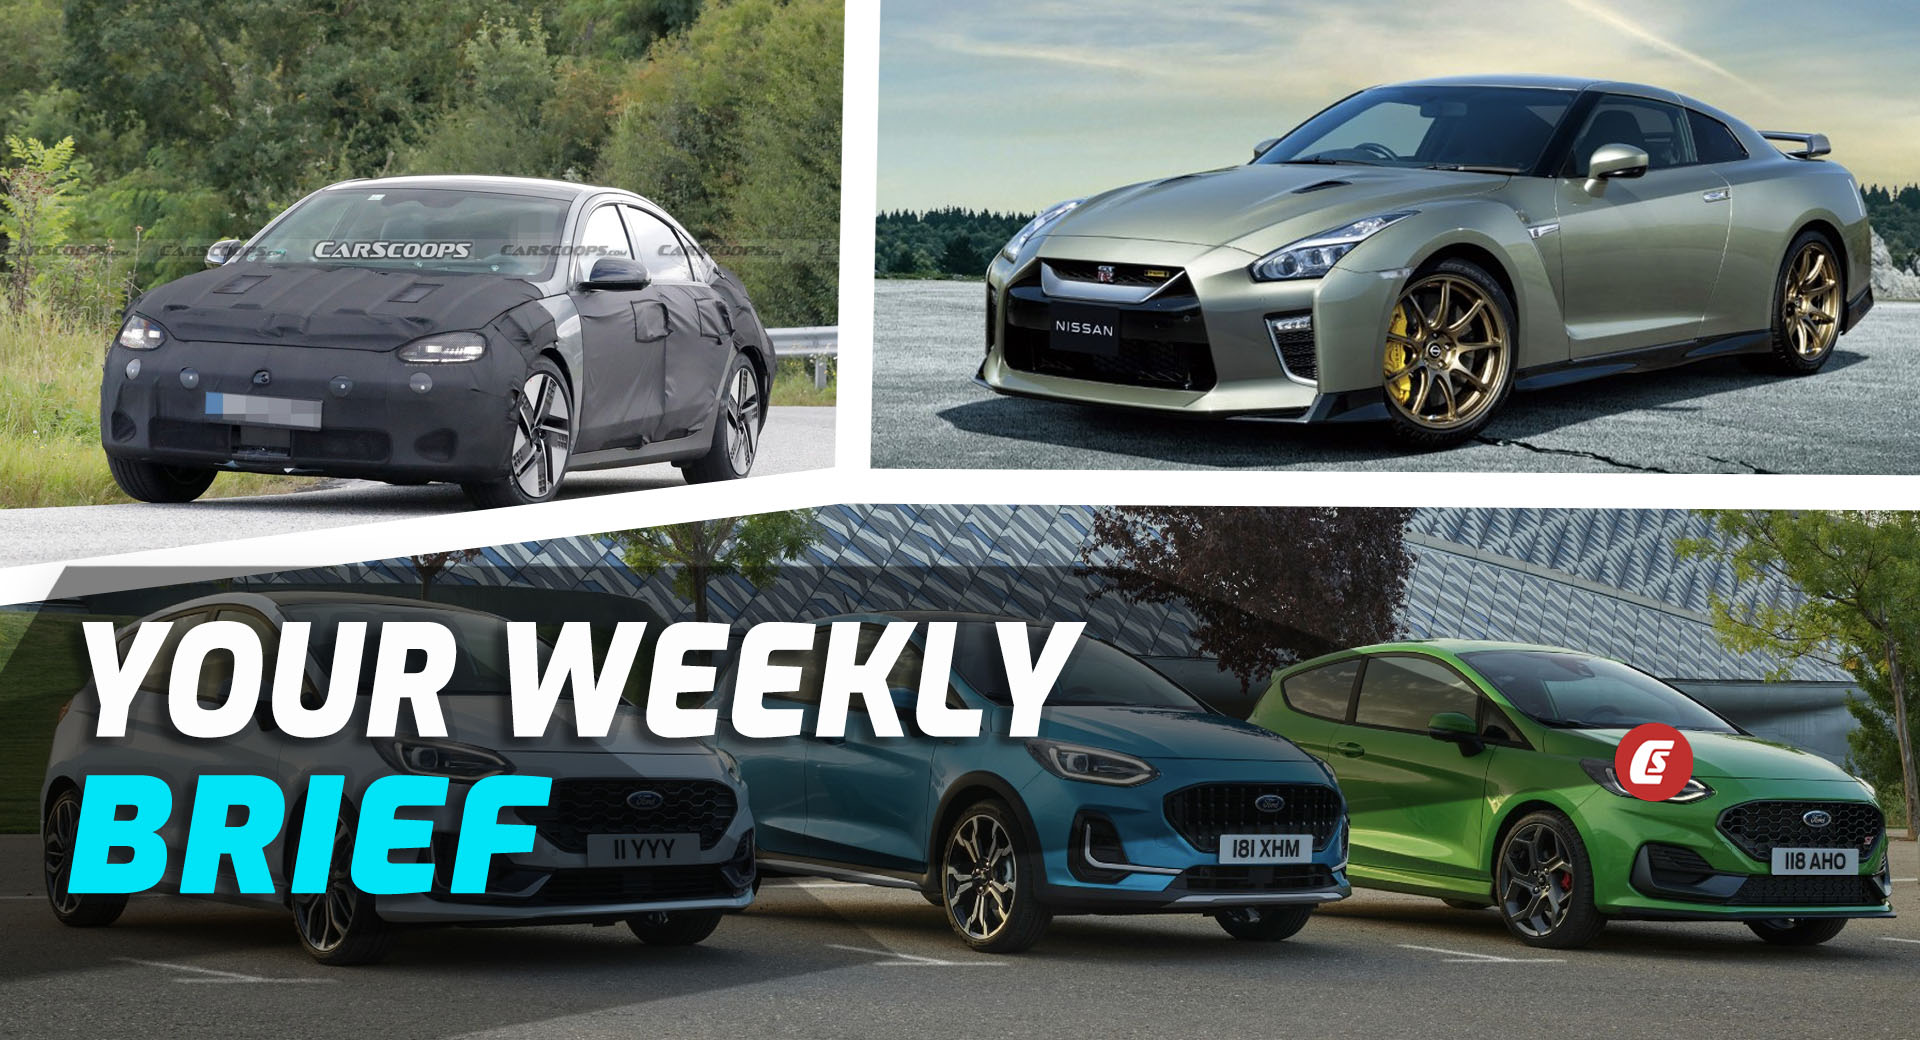 2022 Nissan GT-R Unveiled, Ford Gives The Fiesta A Facelift, And Hyundai Ioniq 6 EV Spied: Your Weekly Brief